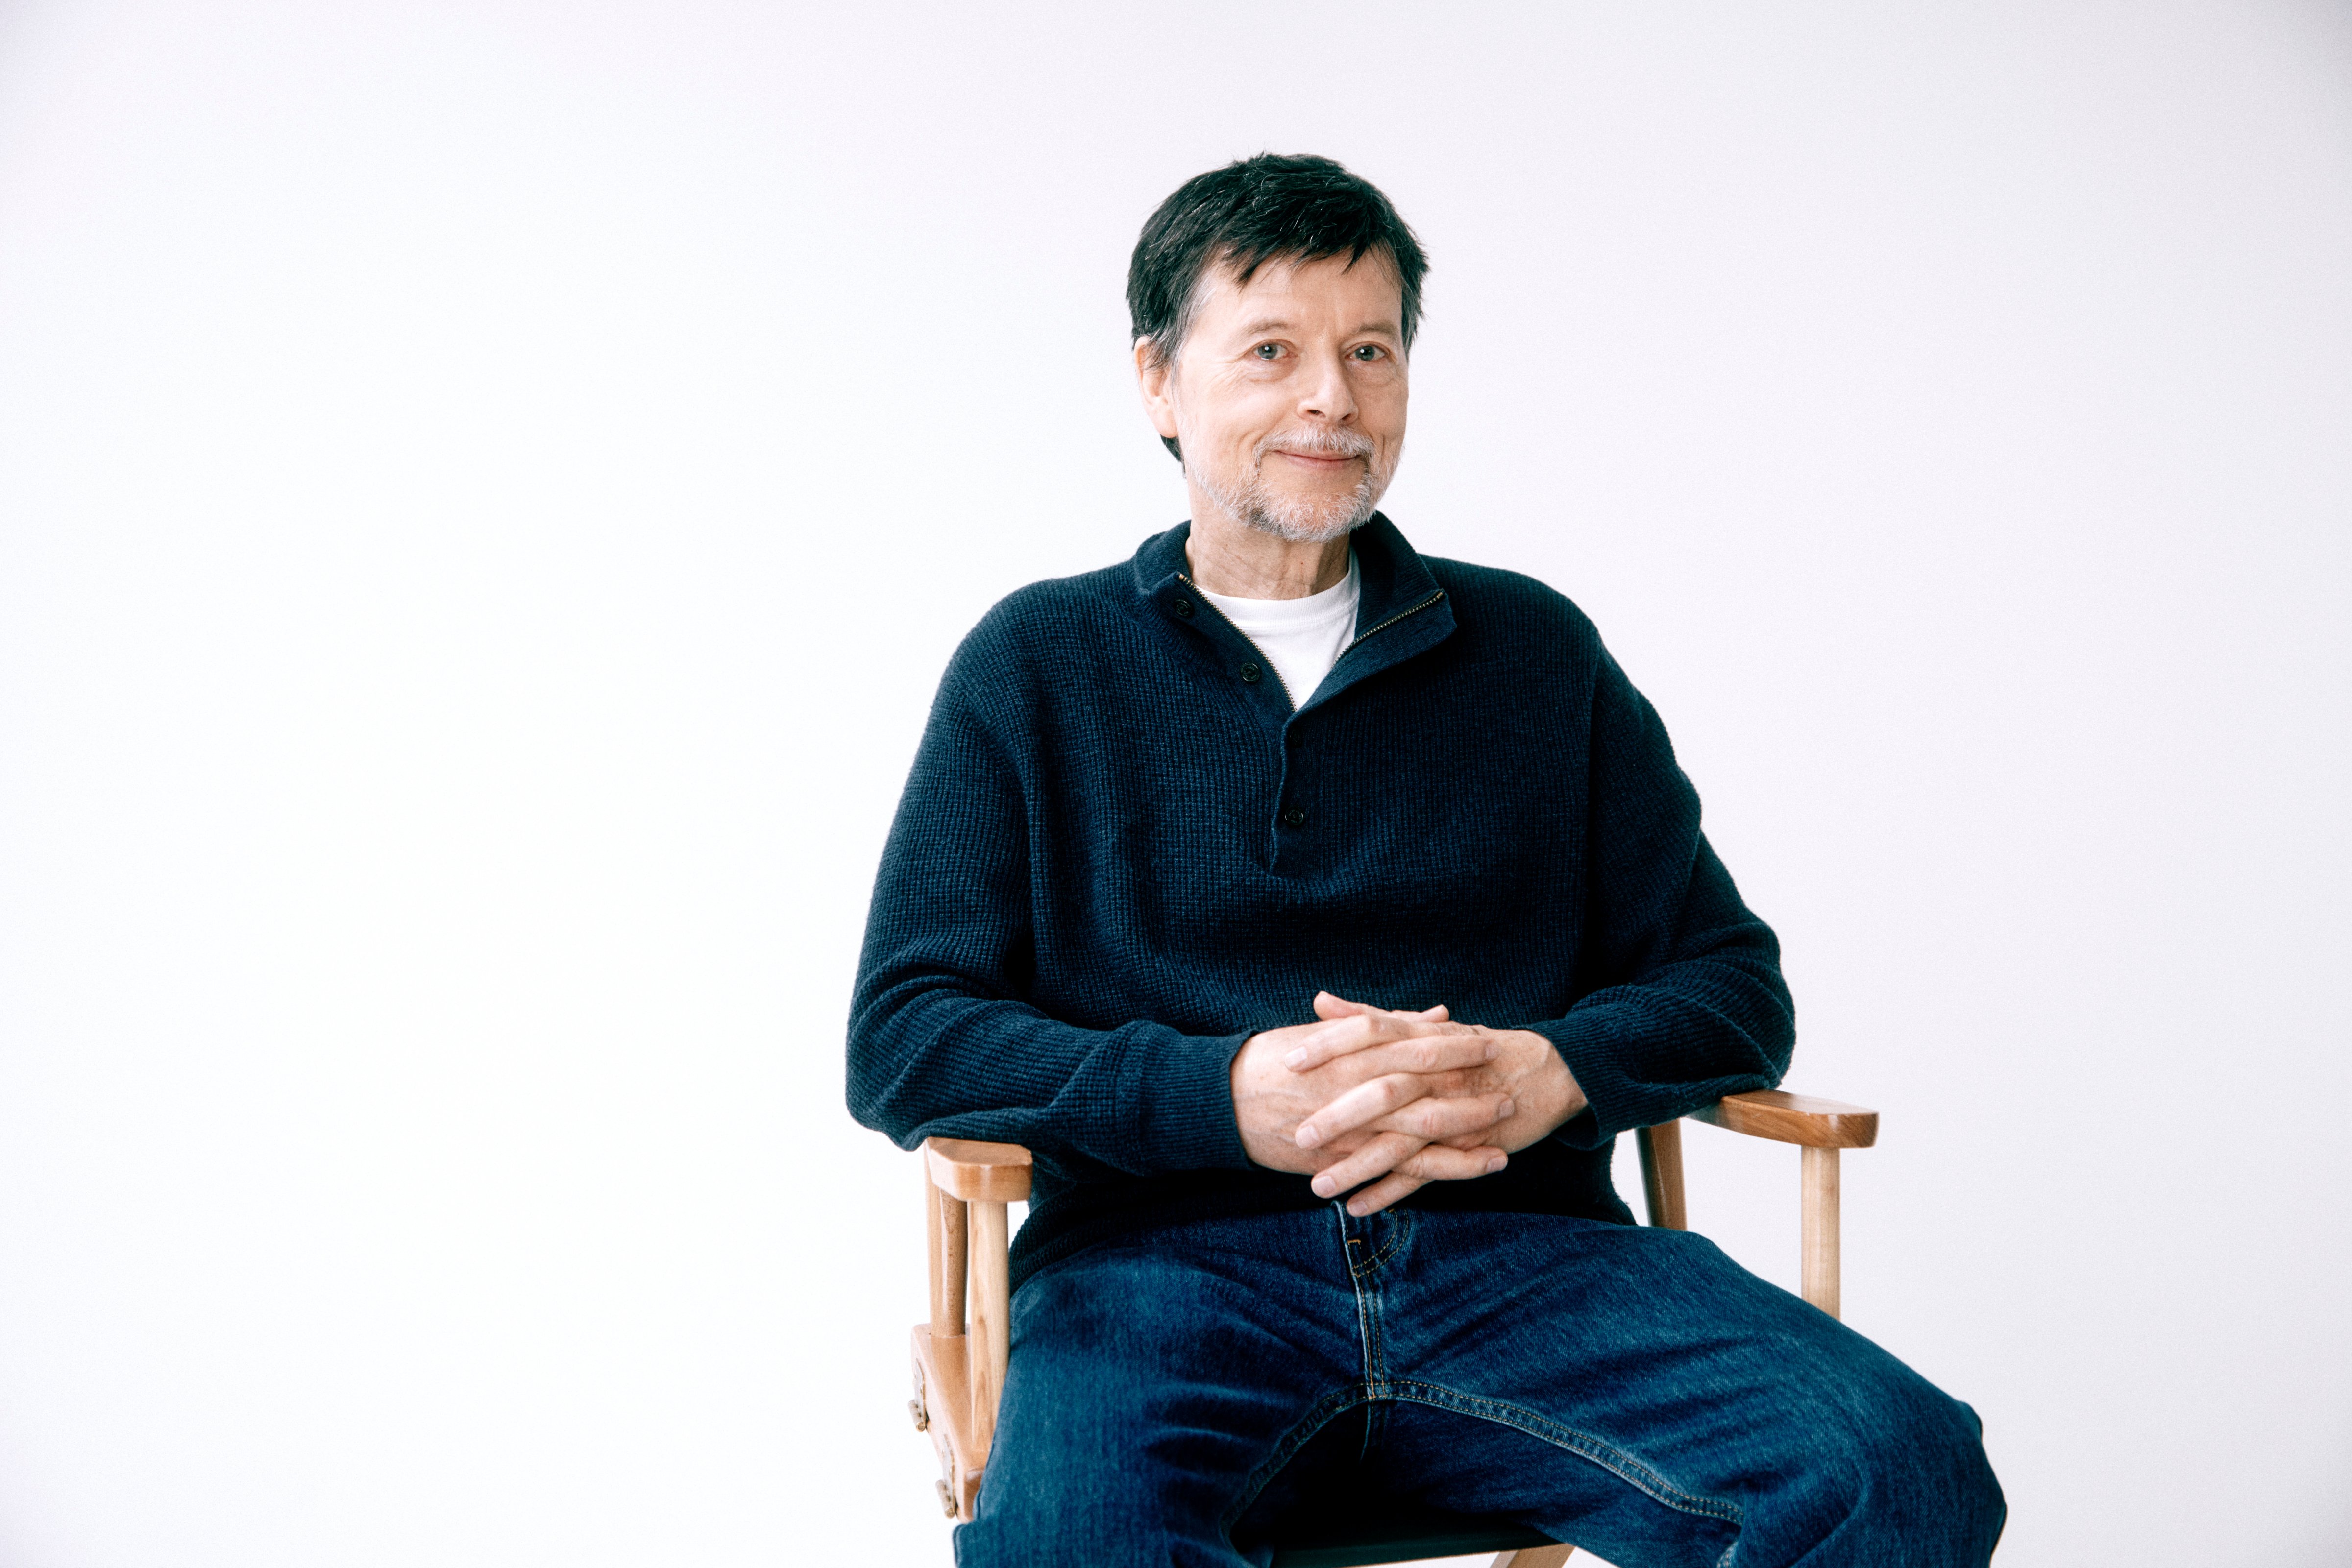 Ken Burns on his new film, 'The U.S. and the Holocaust